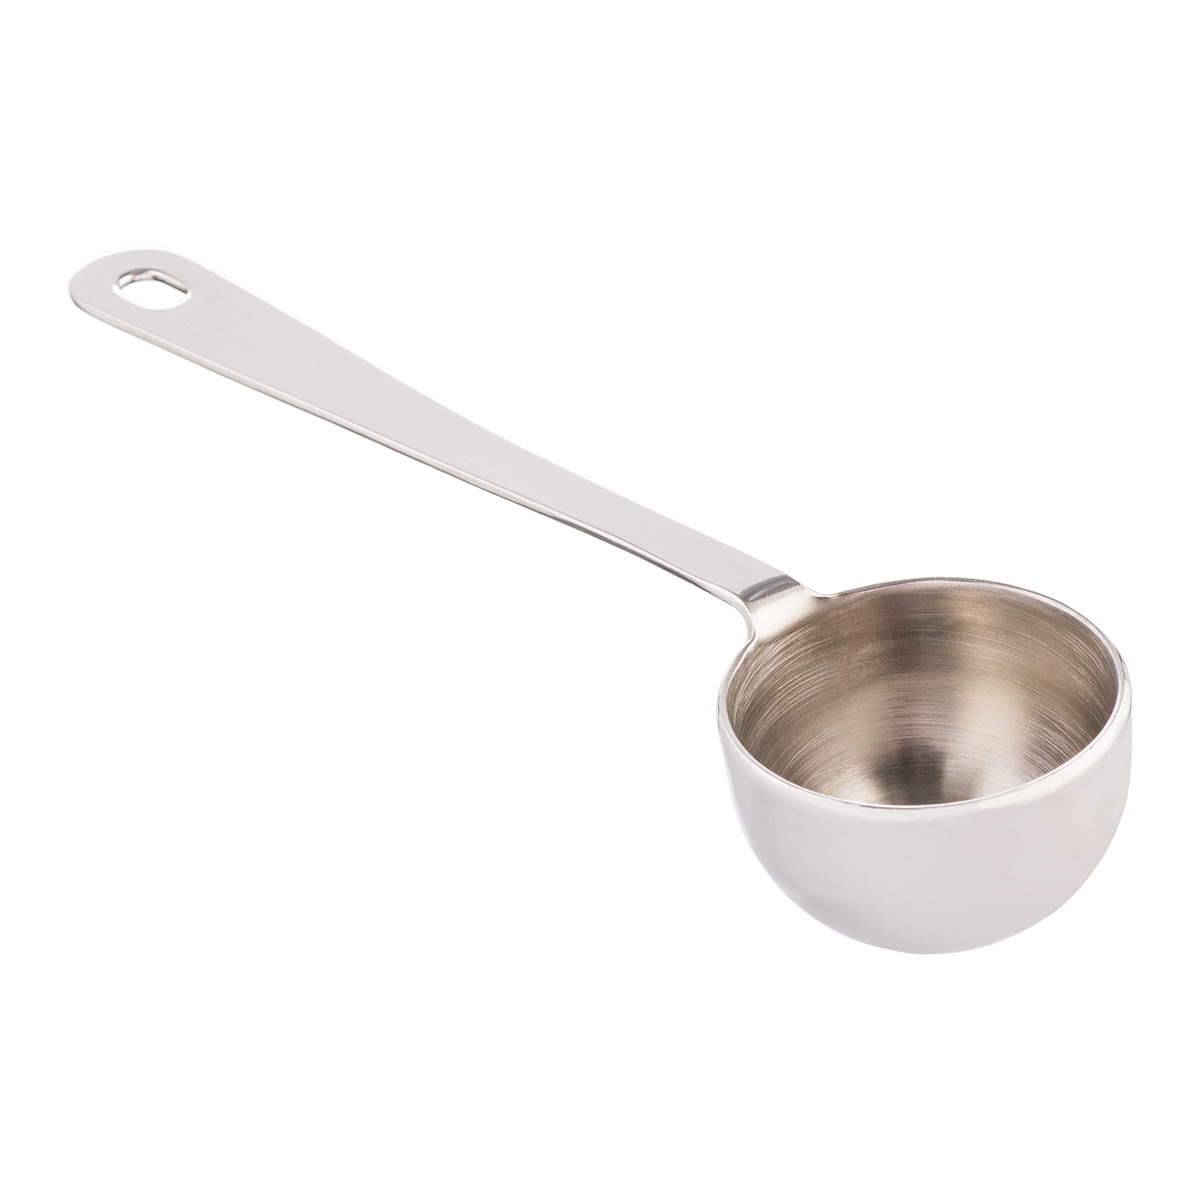 https://www.containerstore.com/catalogimages/304811/537150-coffee-scoop-stainless-steal_.jpg